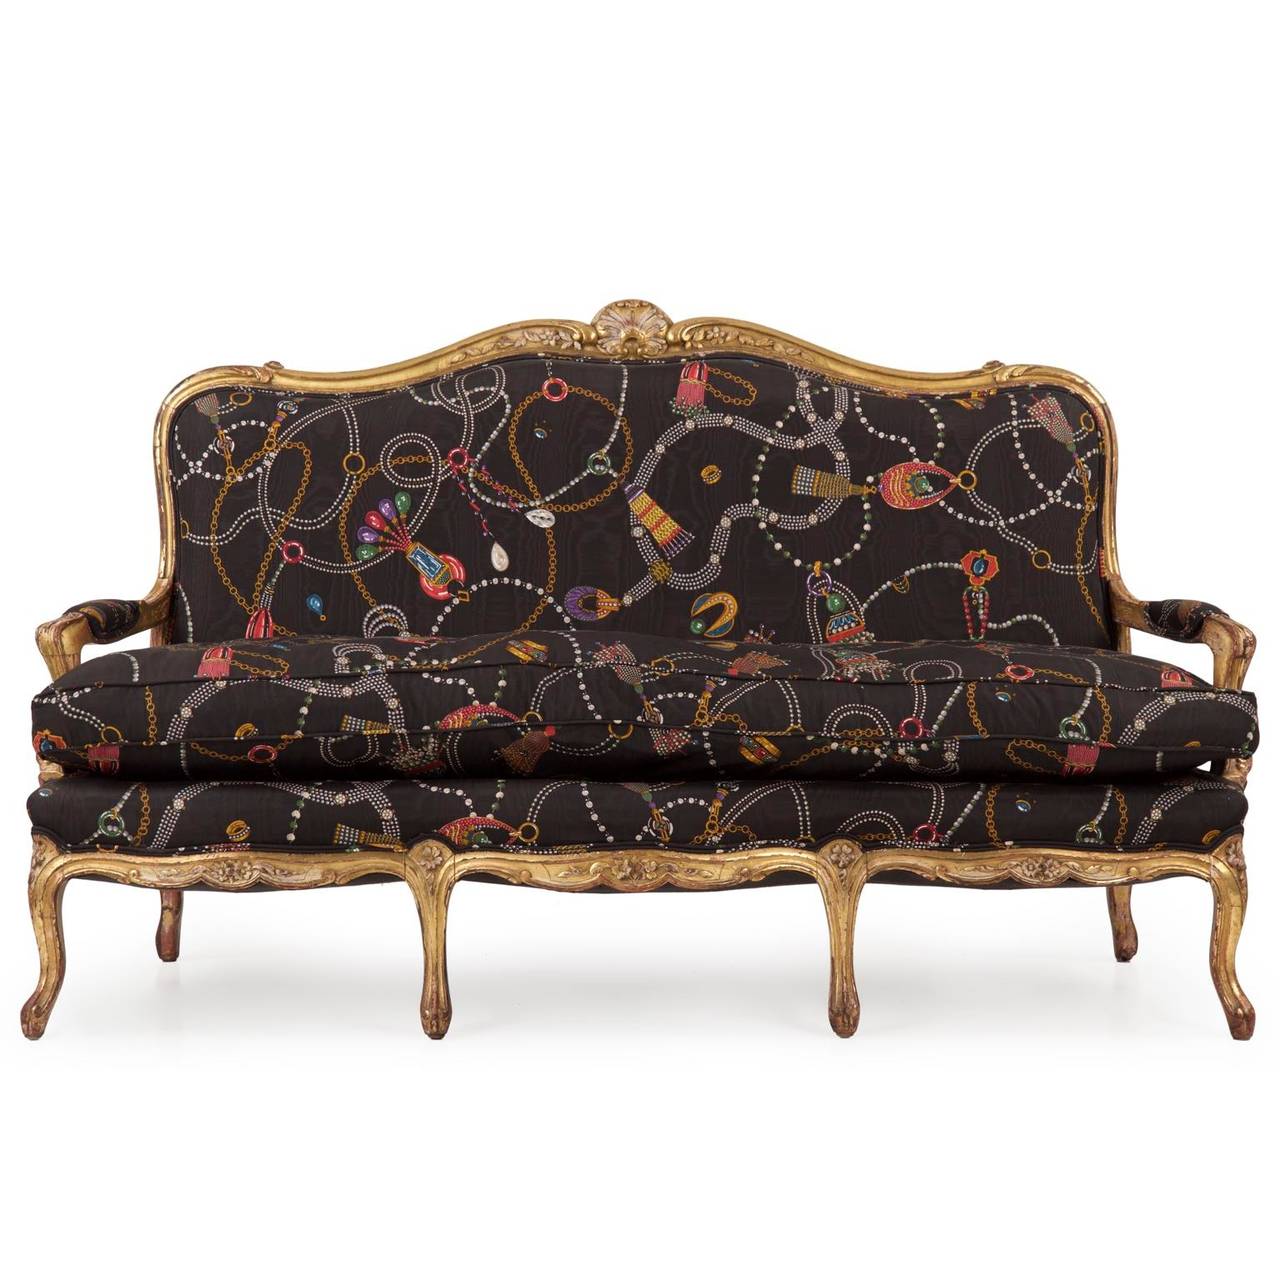 An exceedingly attractive piece preserved in quite fine condition, this French Louis XV style settee was probably crafted during the third quarter of the 19th Century circa 1860-1880.  The carved frame is exquisite, the crest with a fully developed